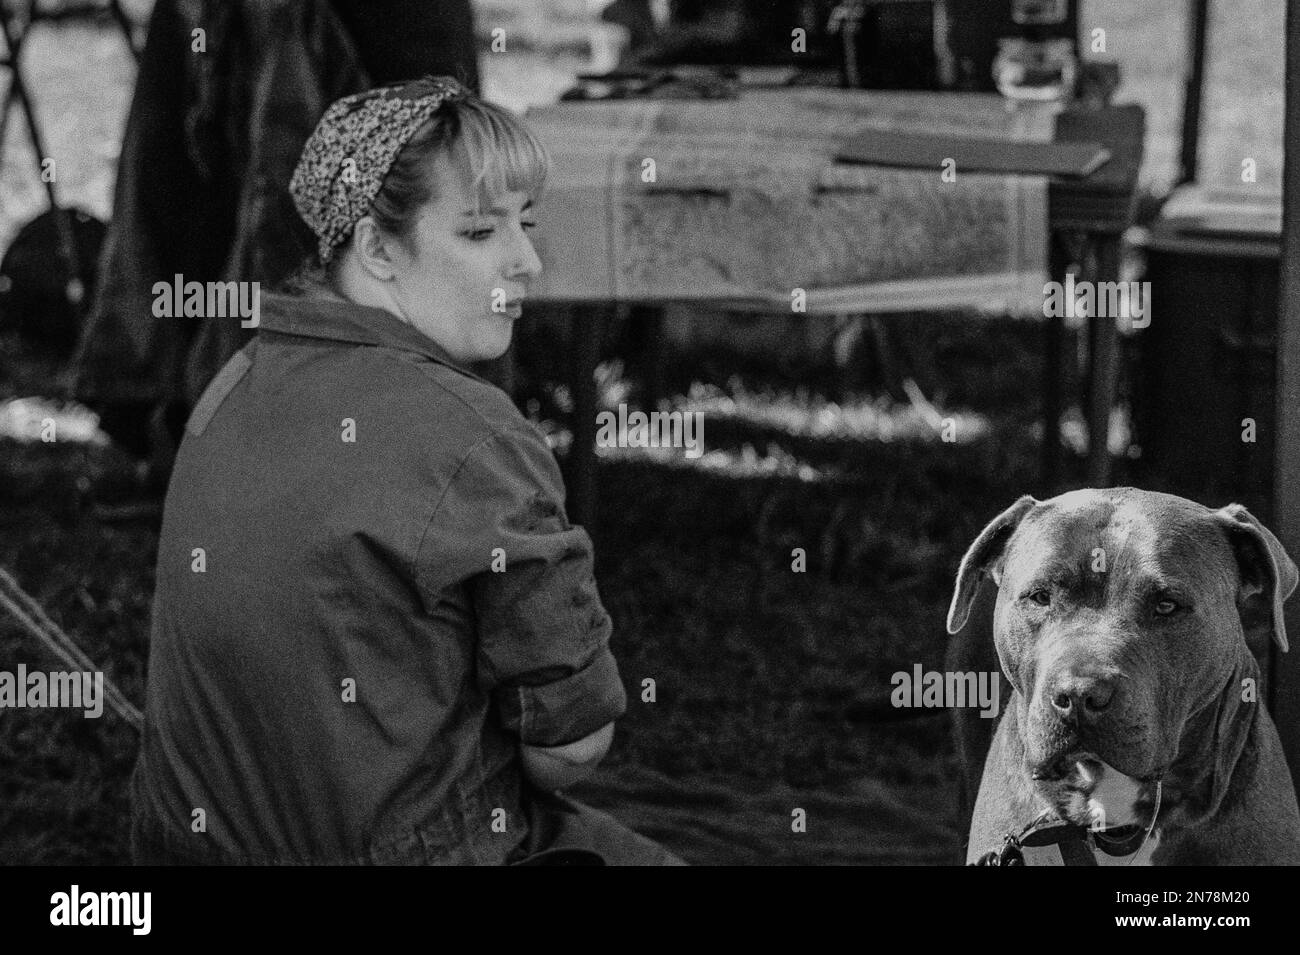 A WWII WAAC reenactor sits with her dog in a tent at the American Heritage Museum. The image was captured on analog black and white film. Hudson, Mass Stock Photo